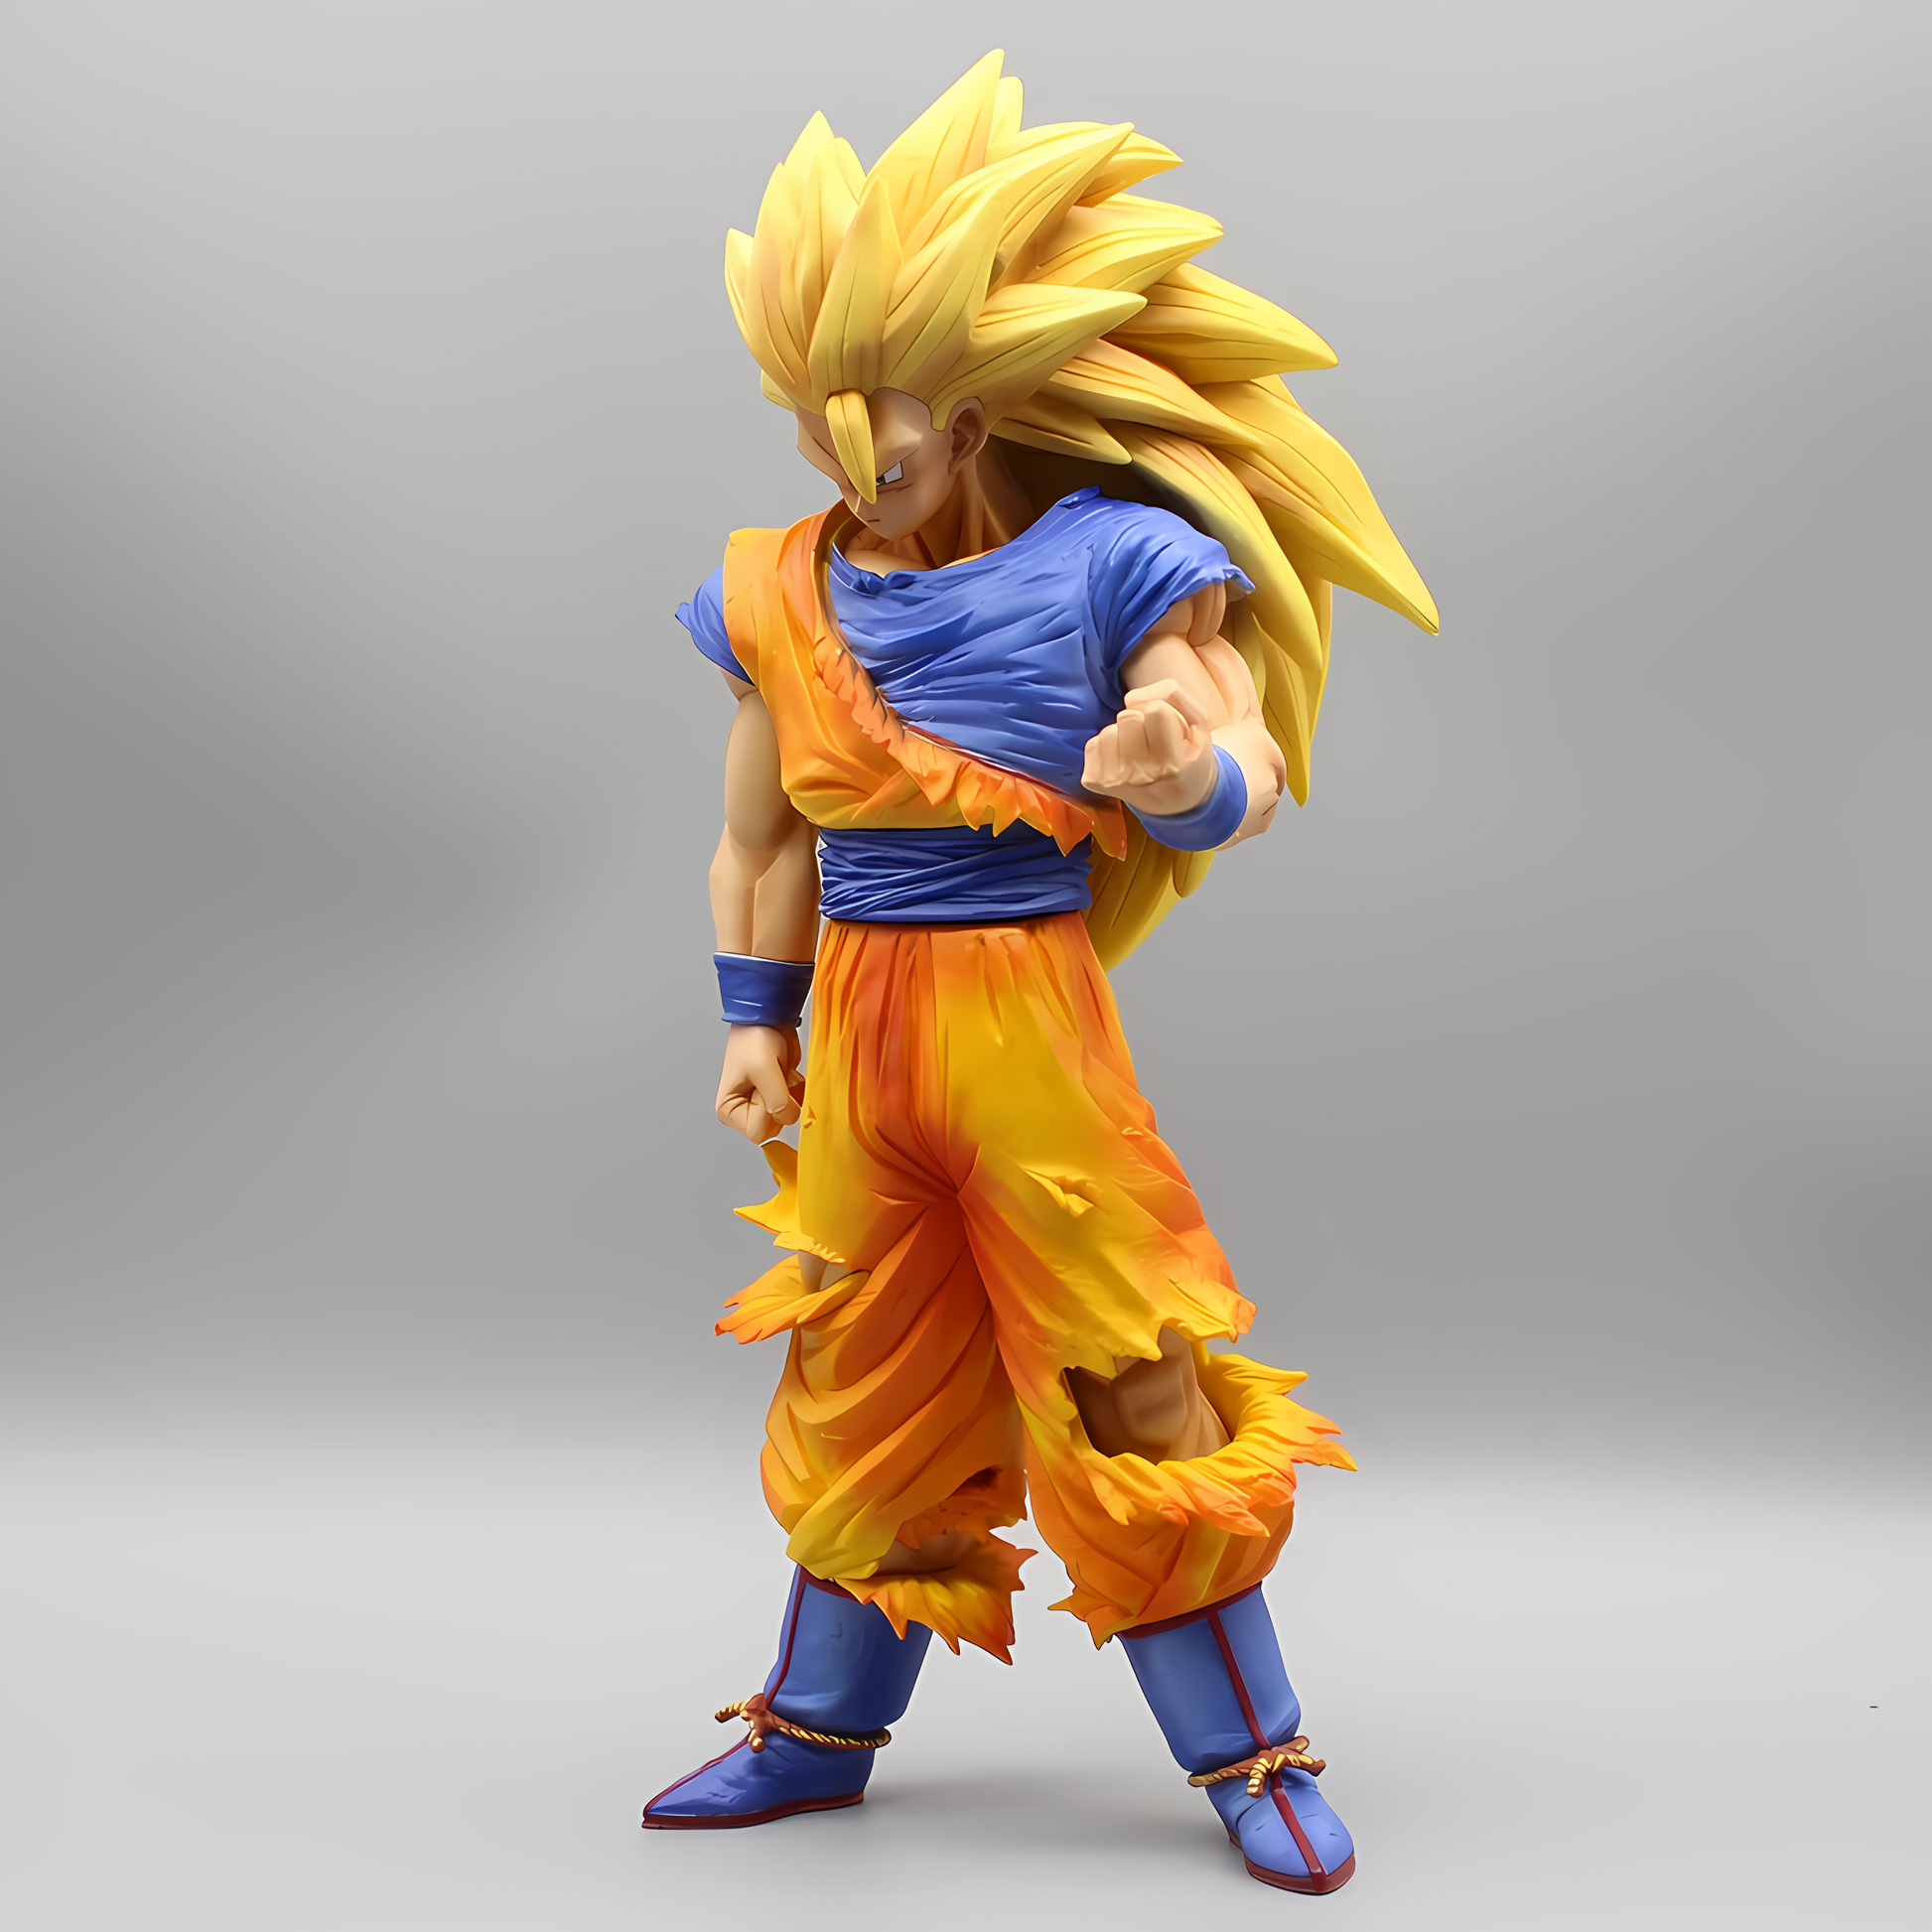 Dynamic angle of the 'Ascendant Fury Goku' figure in a combat stance, showcasing the intense facial expression and battle-damaged clothing.